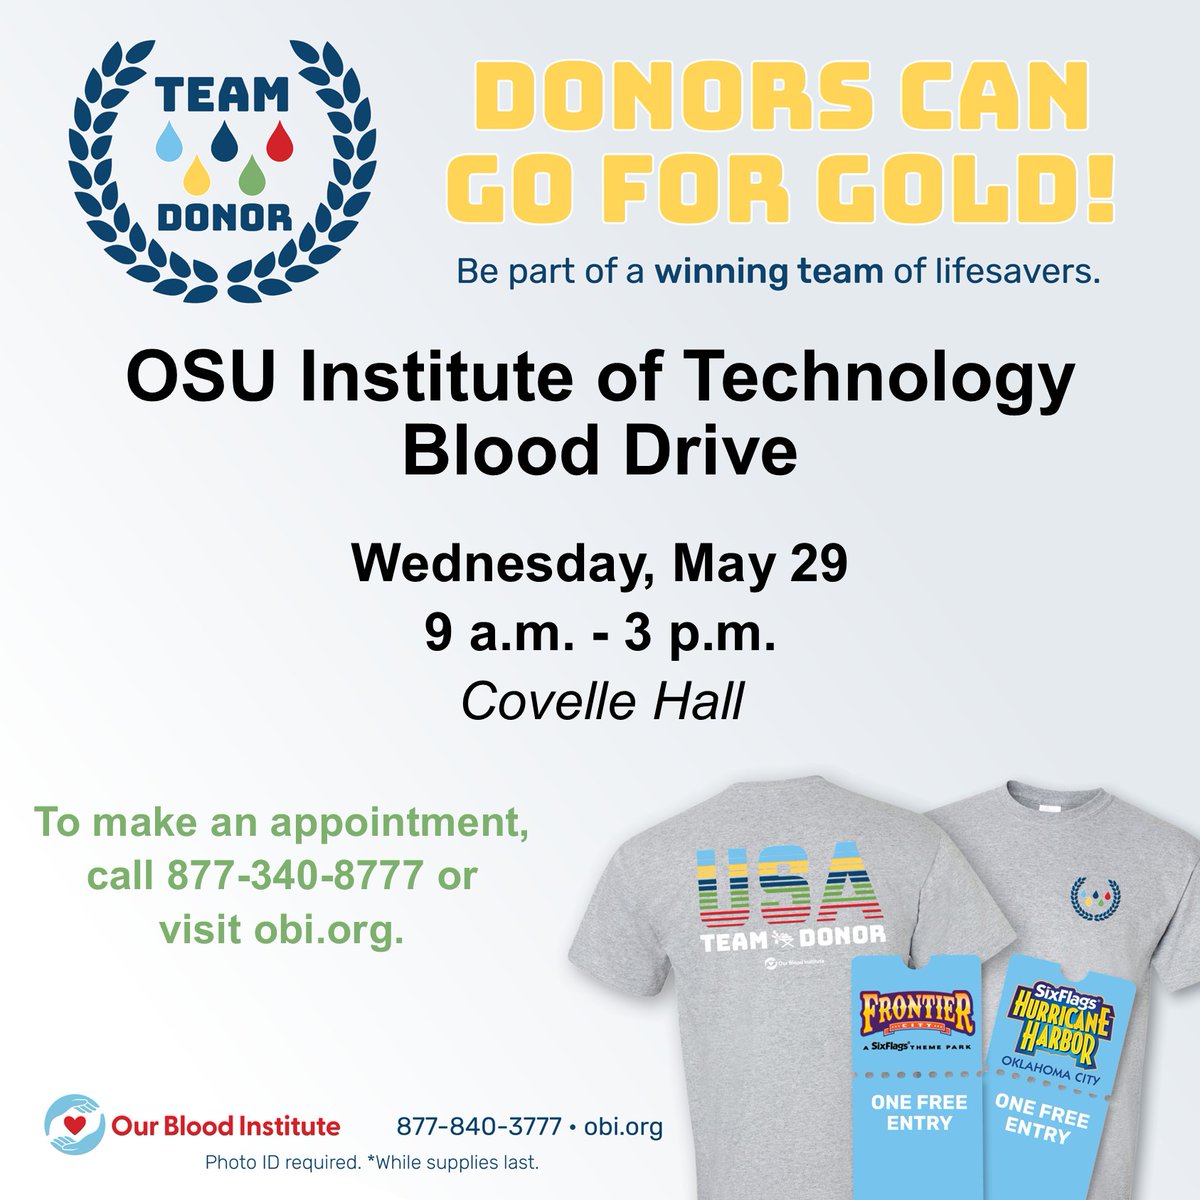 Join us in Covelle Hall TODAY from 9am-3pm and help save a life!!

#OBI #Blooddrive #savinglives #Covelle Hall